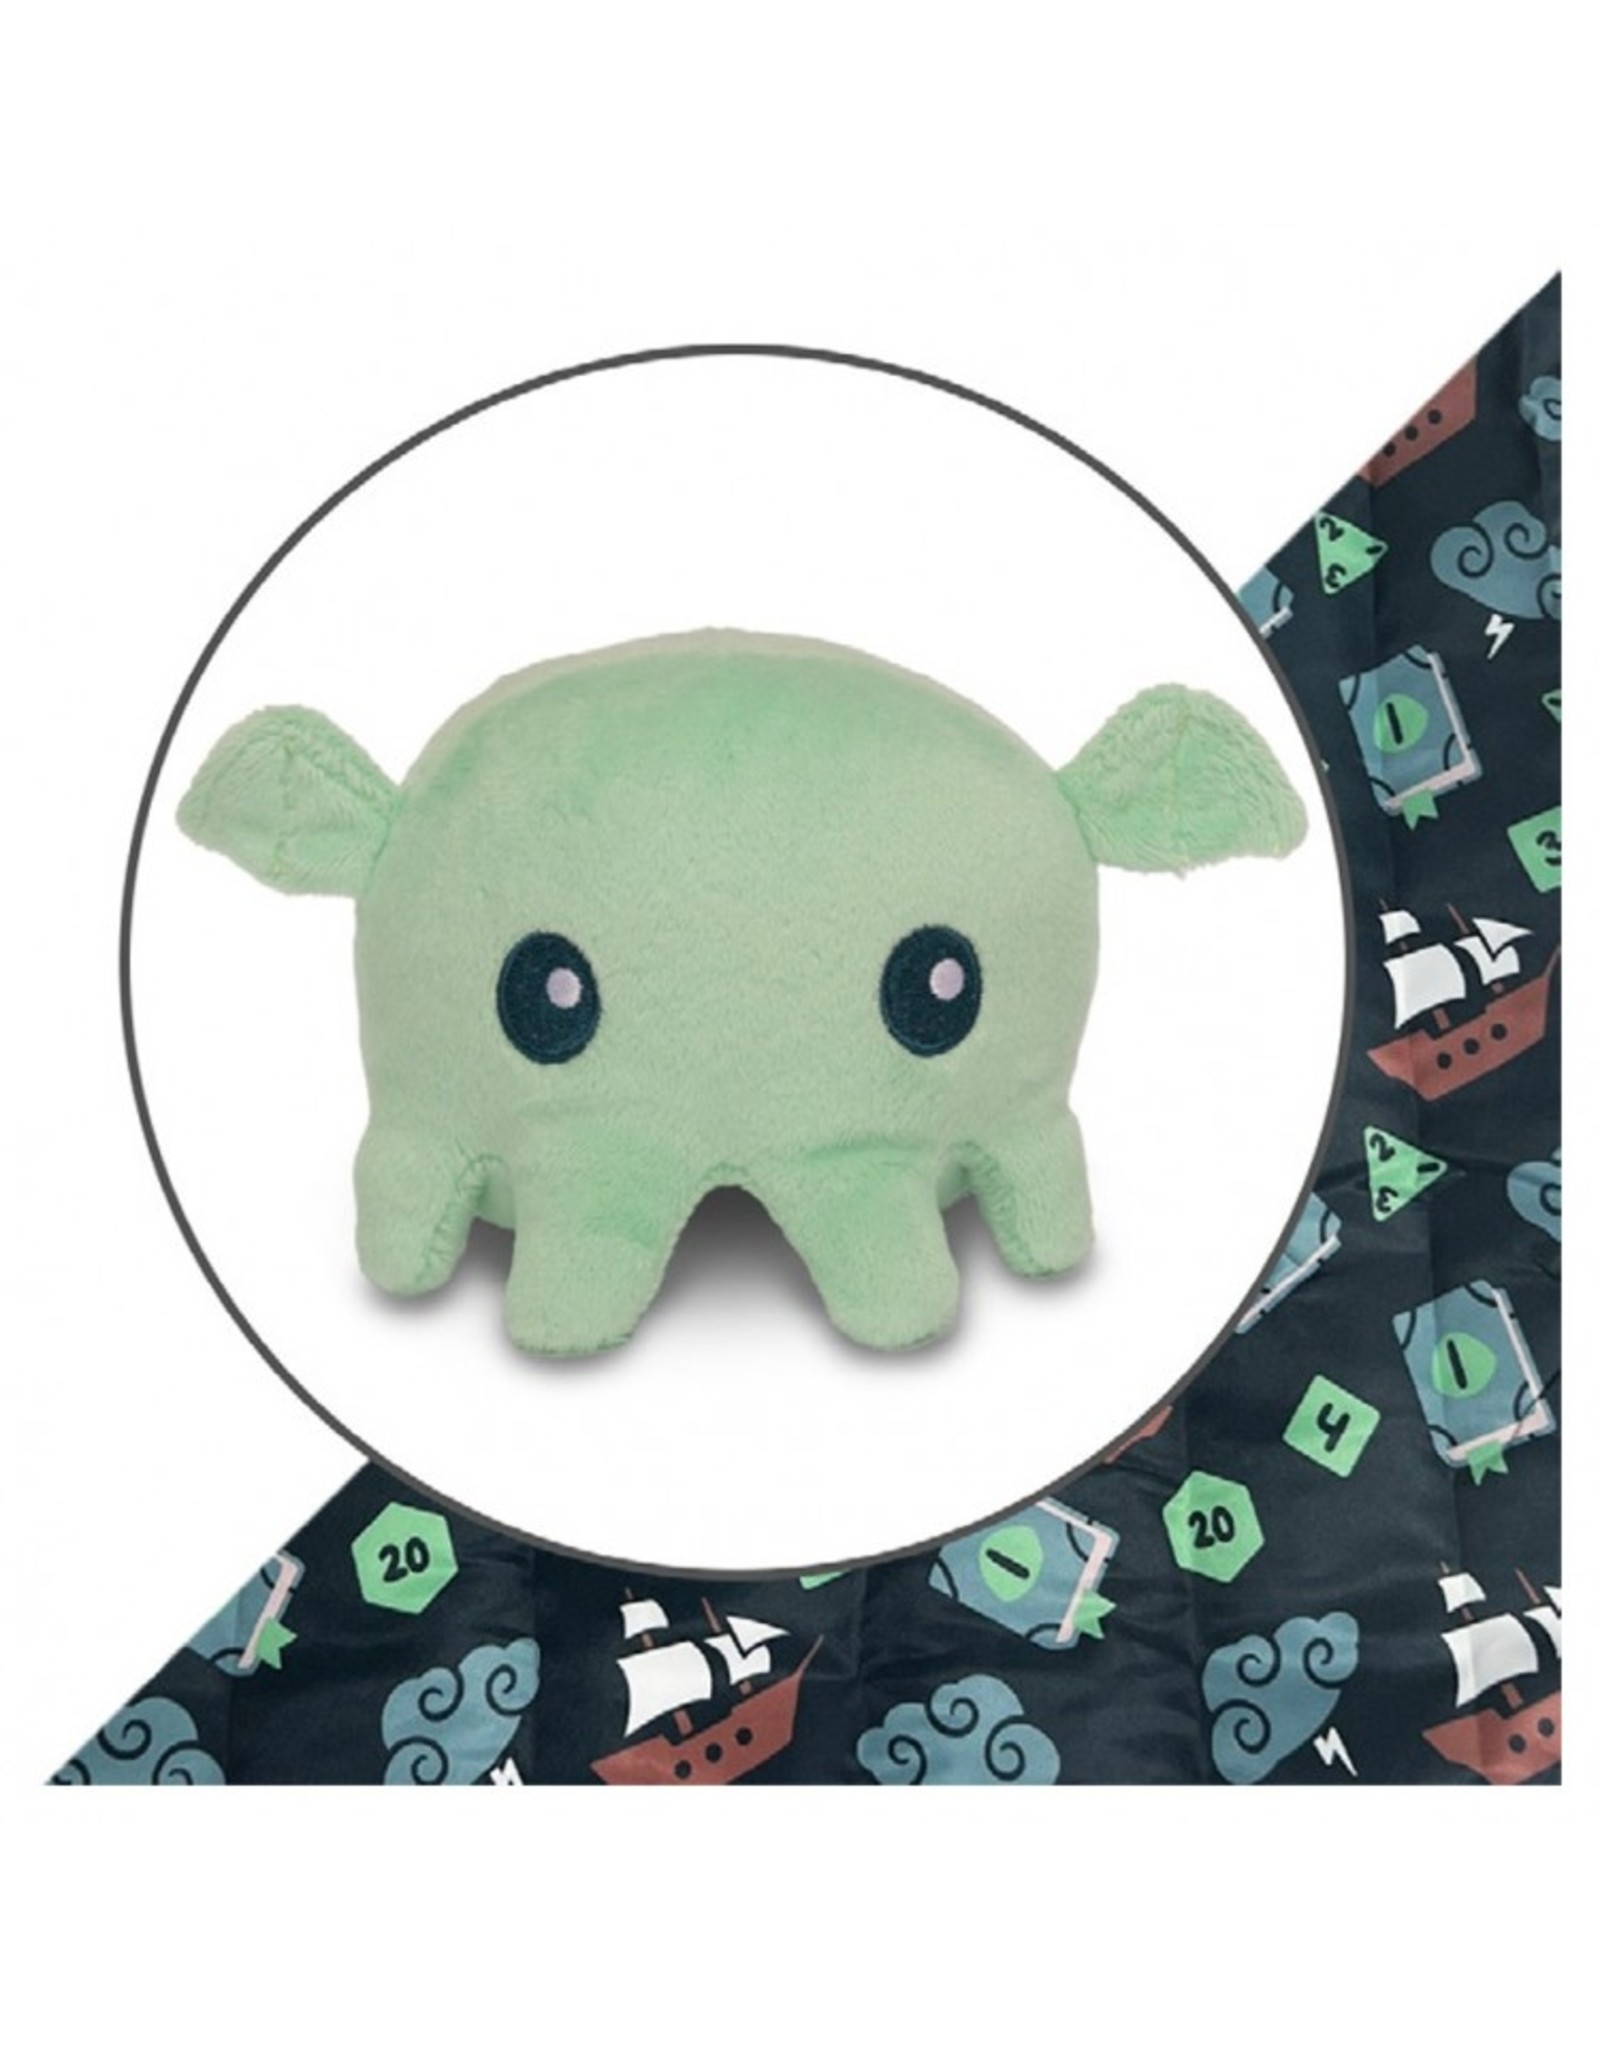 Tee Turtle Plushie Tote: Mint Cthulhu/Tabletop